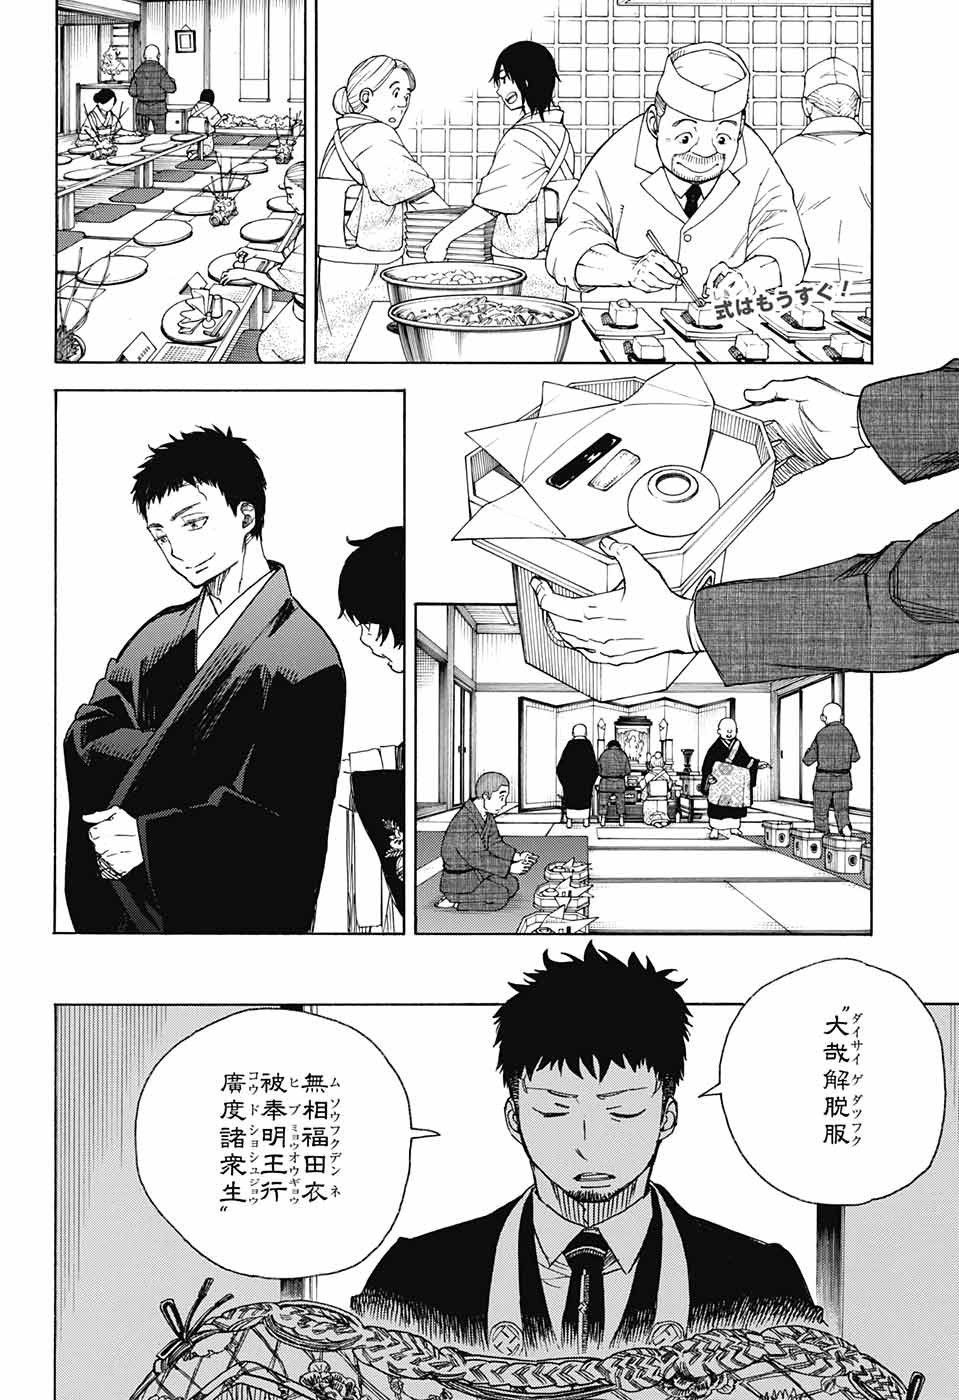 Ao no Exorcist - Chapter 91 - Page 2